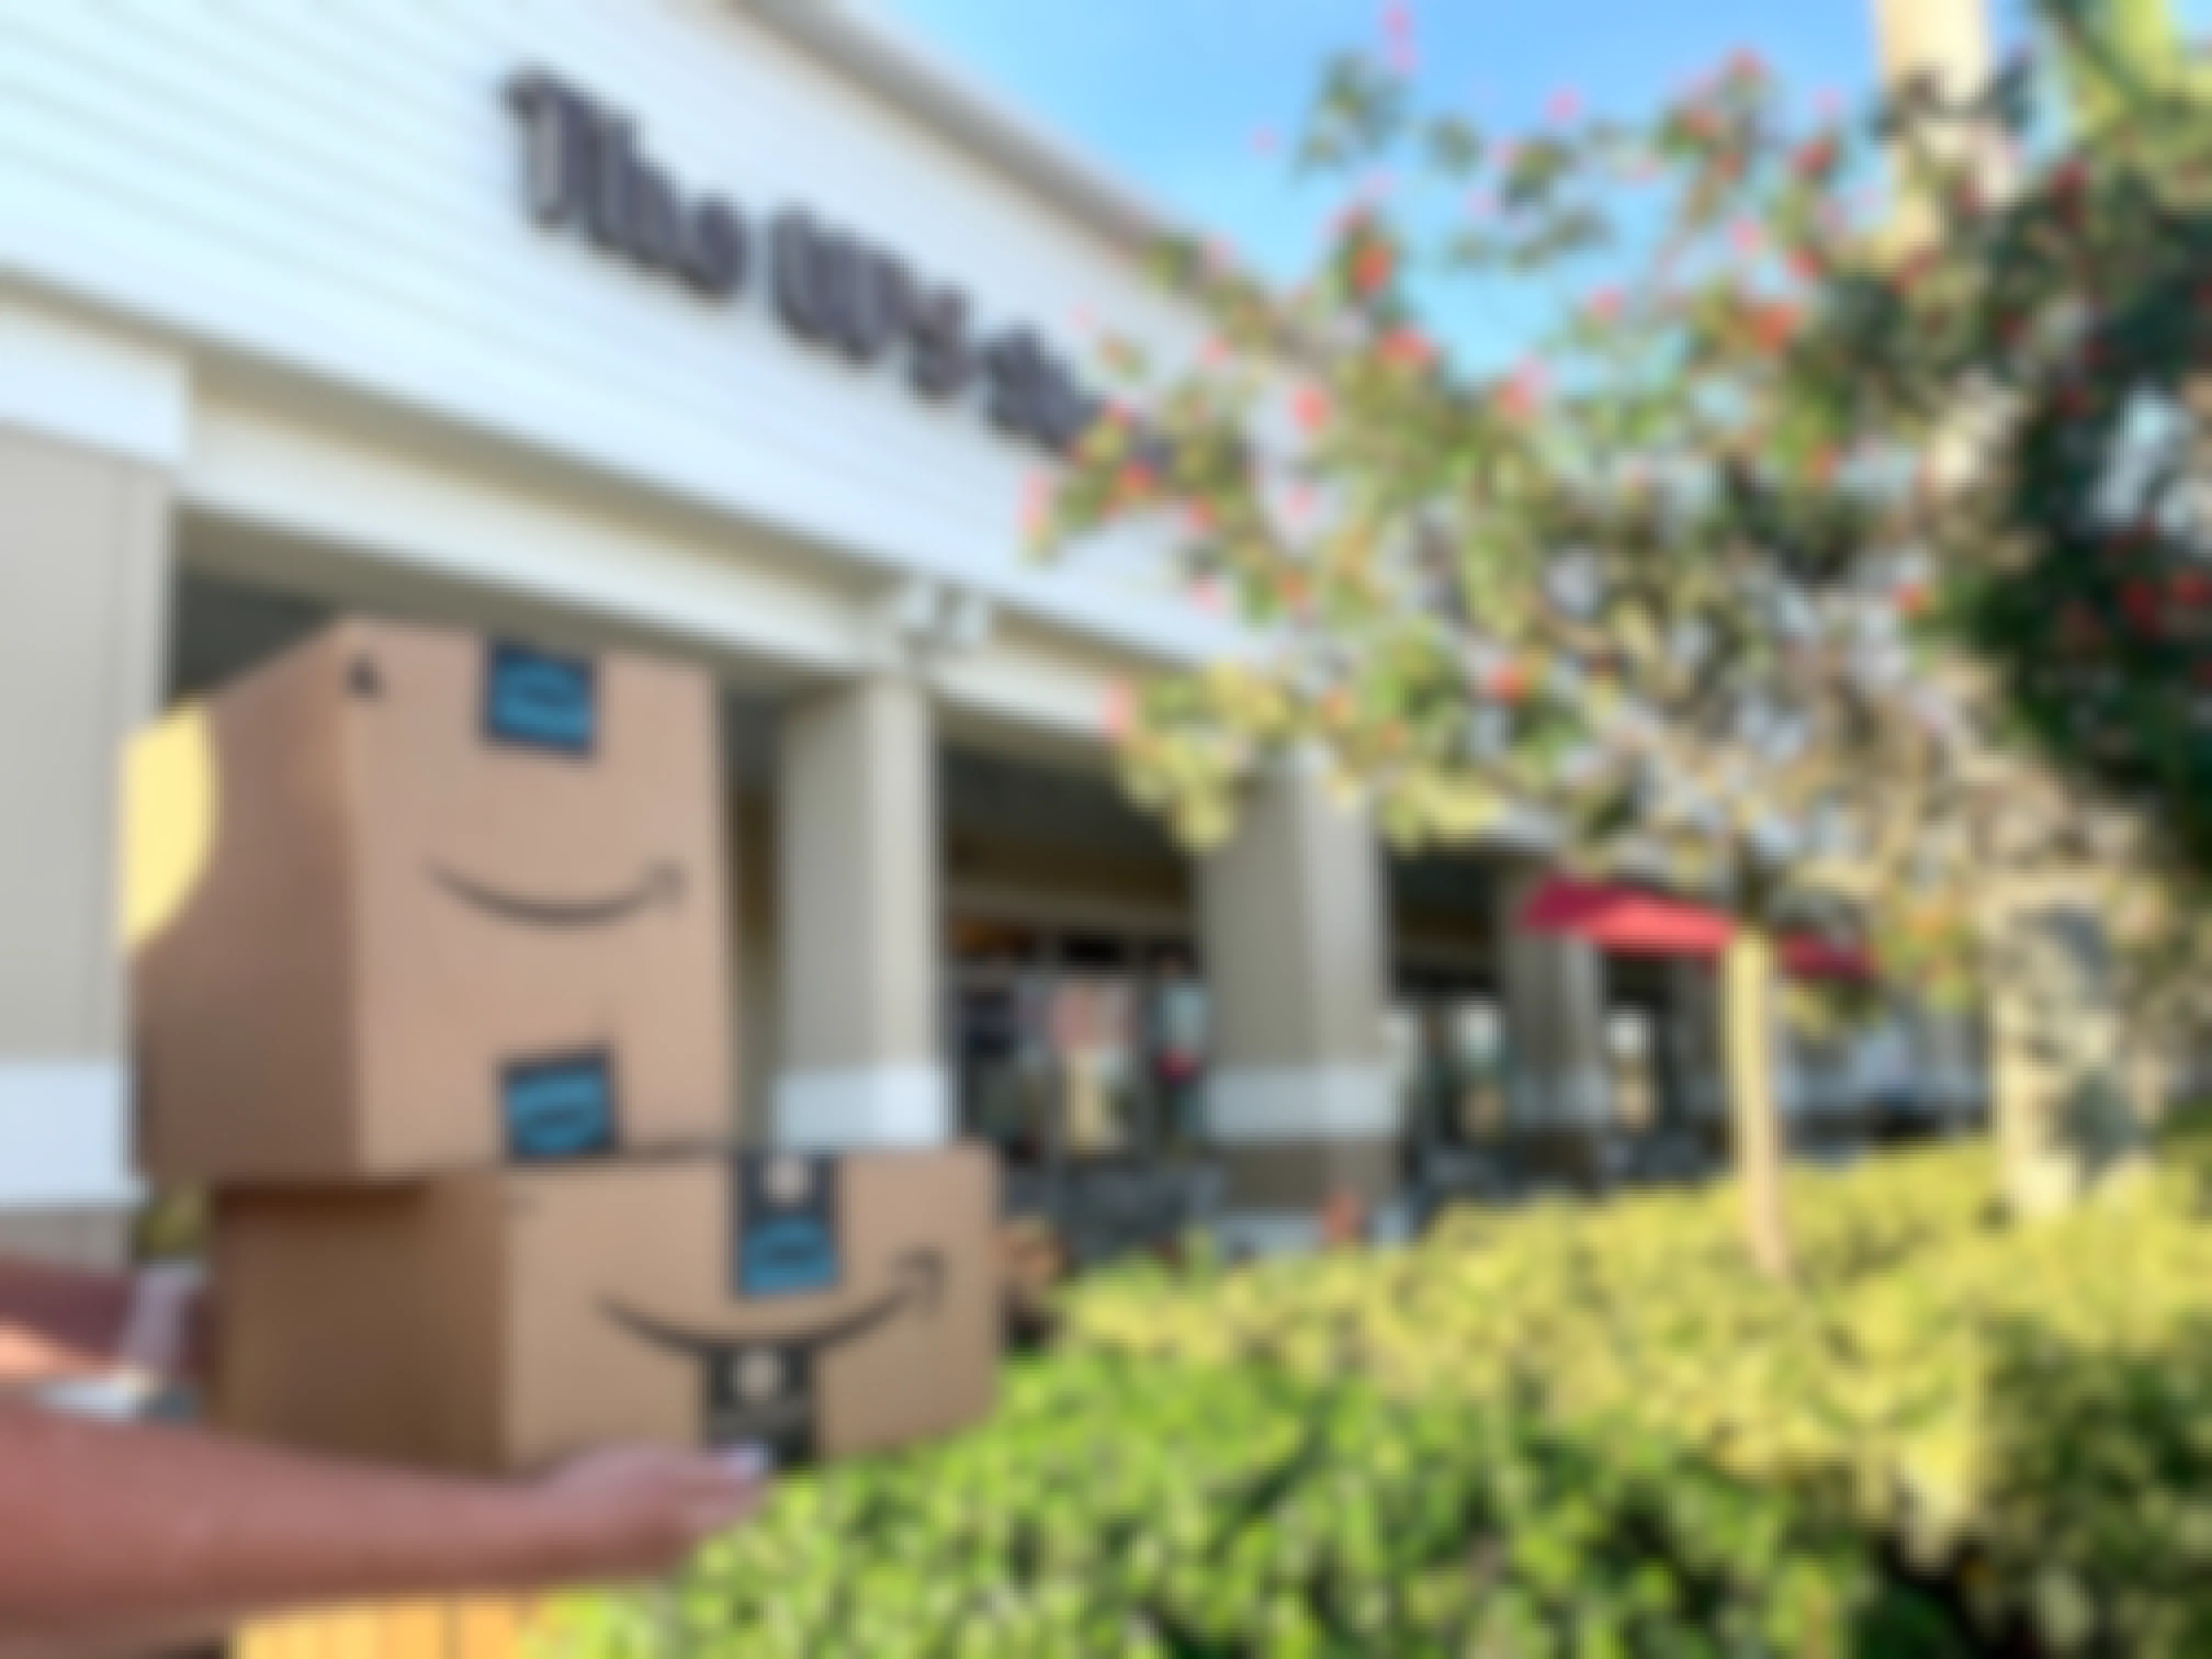 amazon boxes in front of ups store